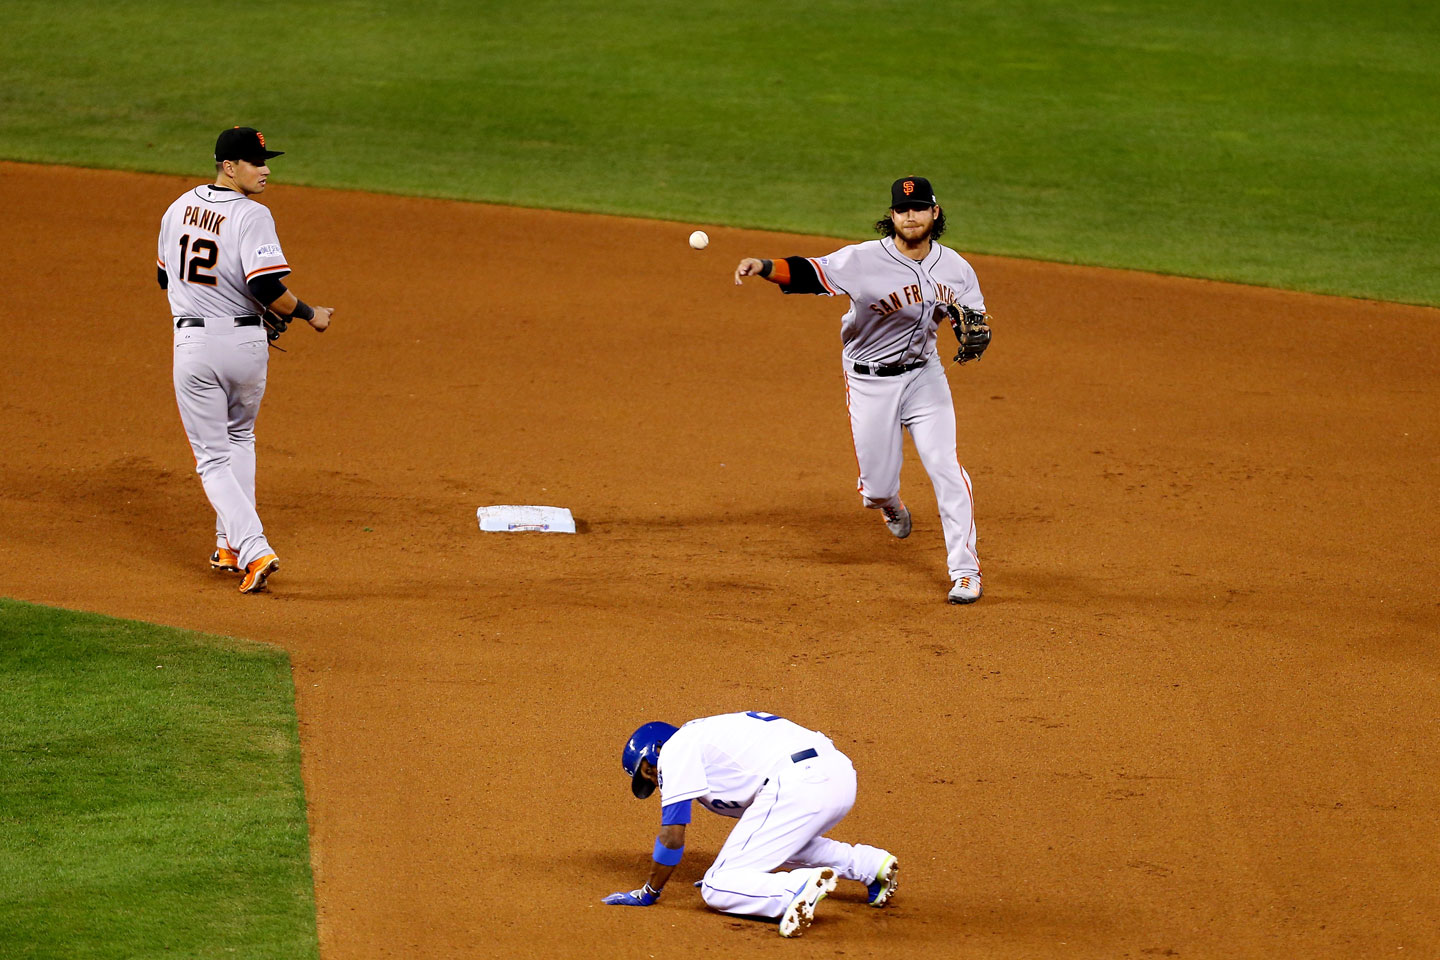 Brandon Crawford fires to first to complete a 4-6-3 double play in the eighth inning. (Ed Zurga/Getty Images)